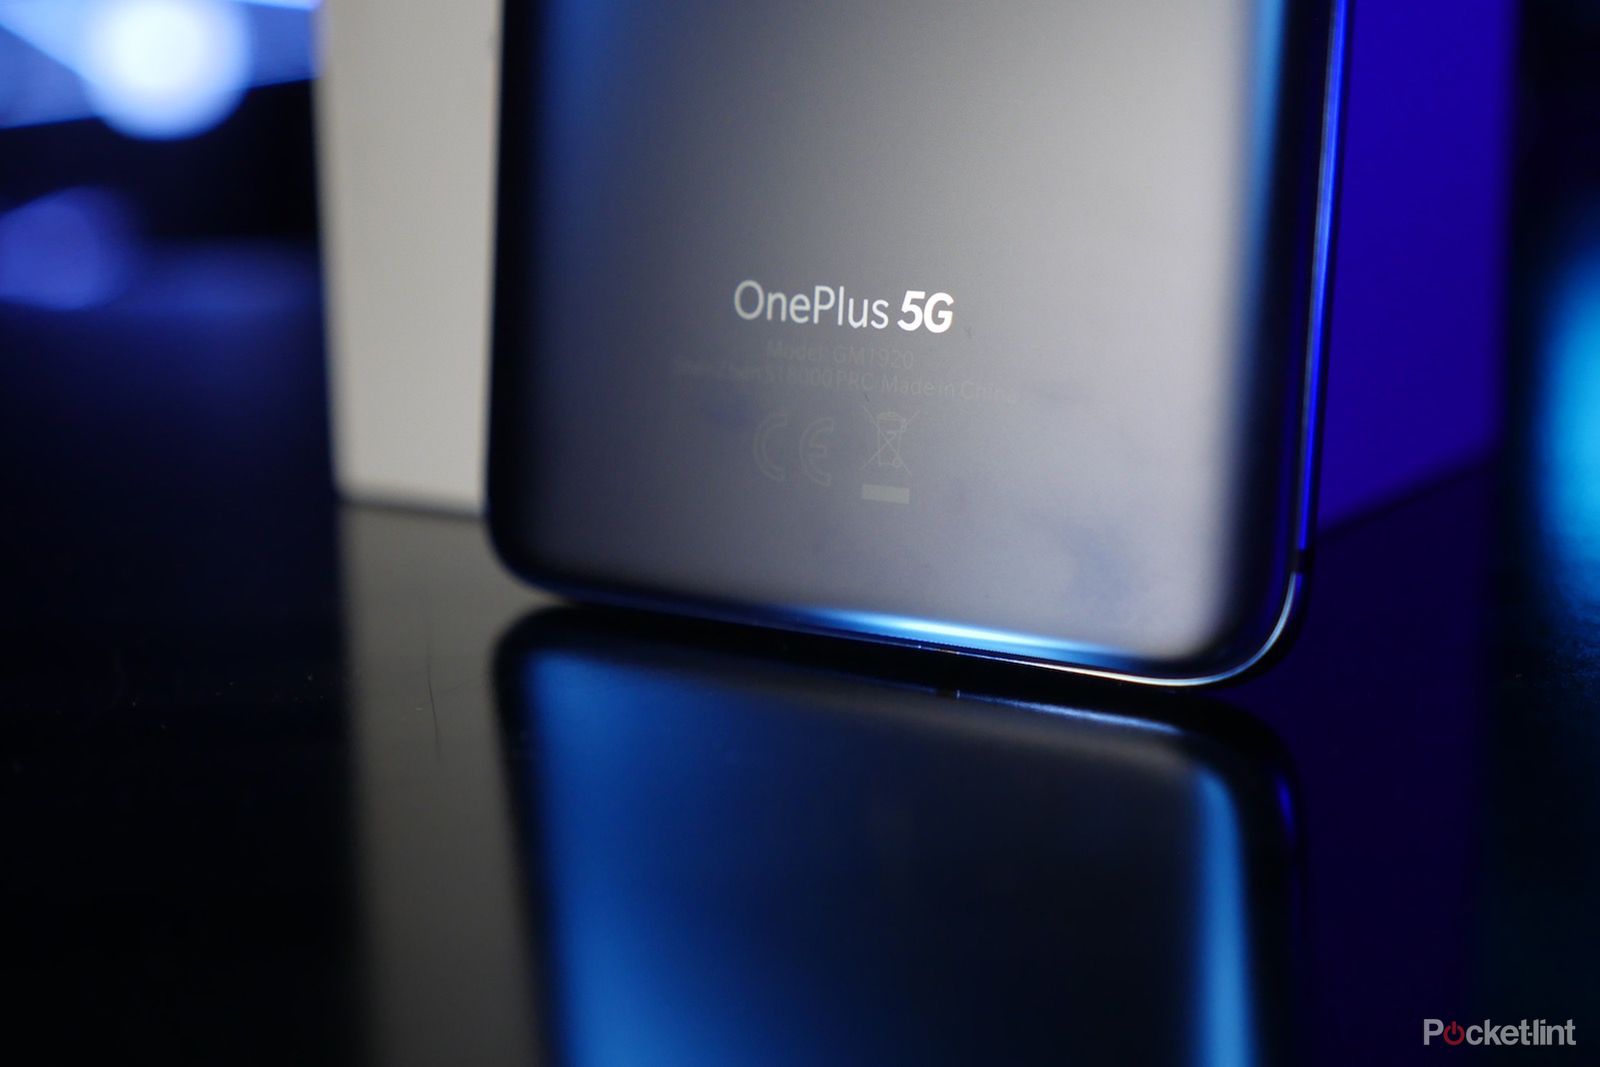 OnePlus CEO confirms a second 5G phone is coming soon image 1